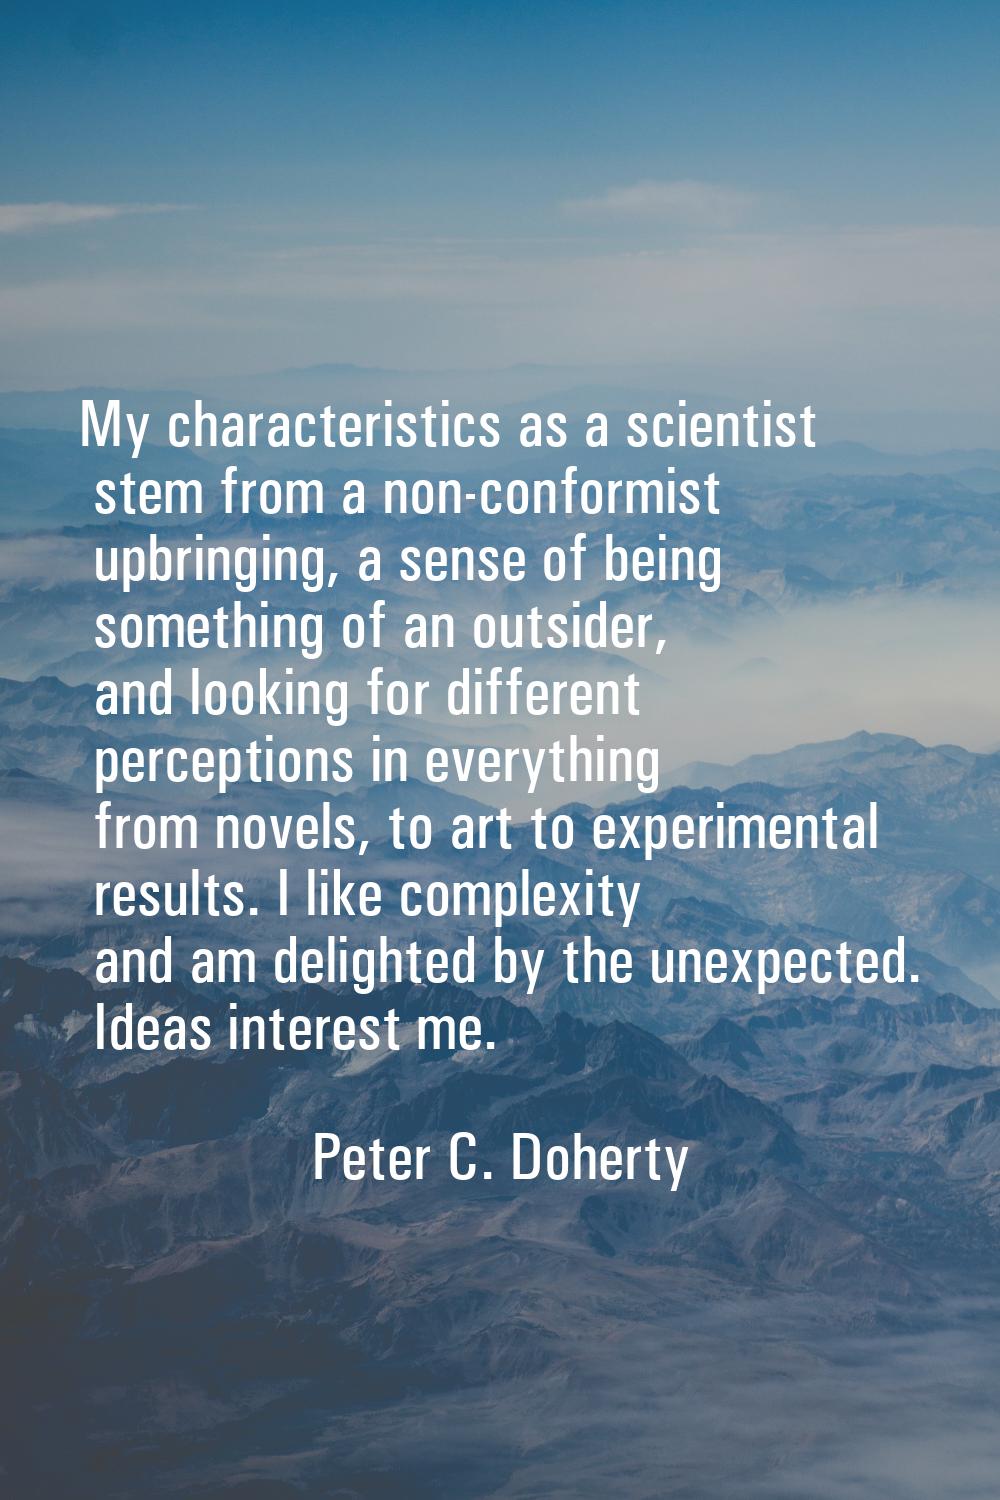 My characteristics as a scientist stem from a non-conformist upbringing, a sense of being something